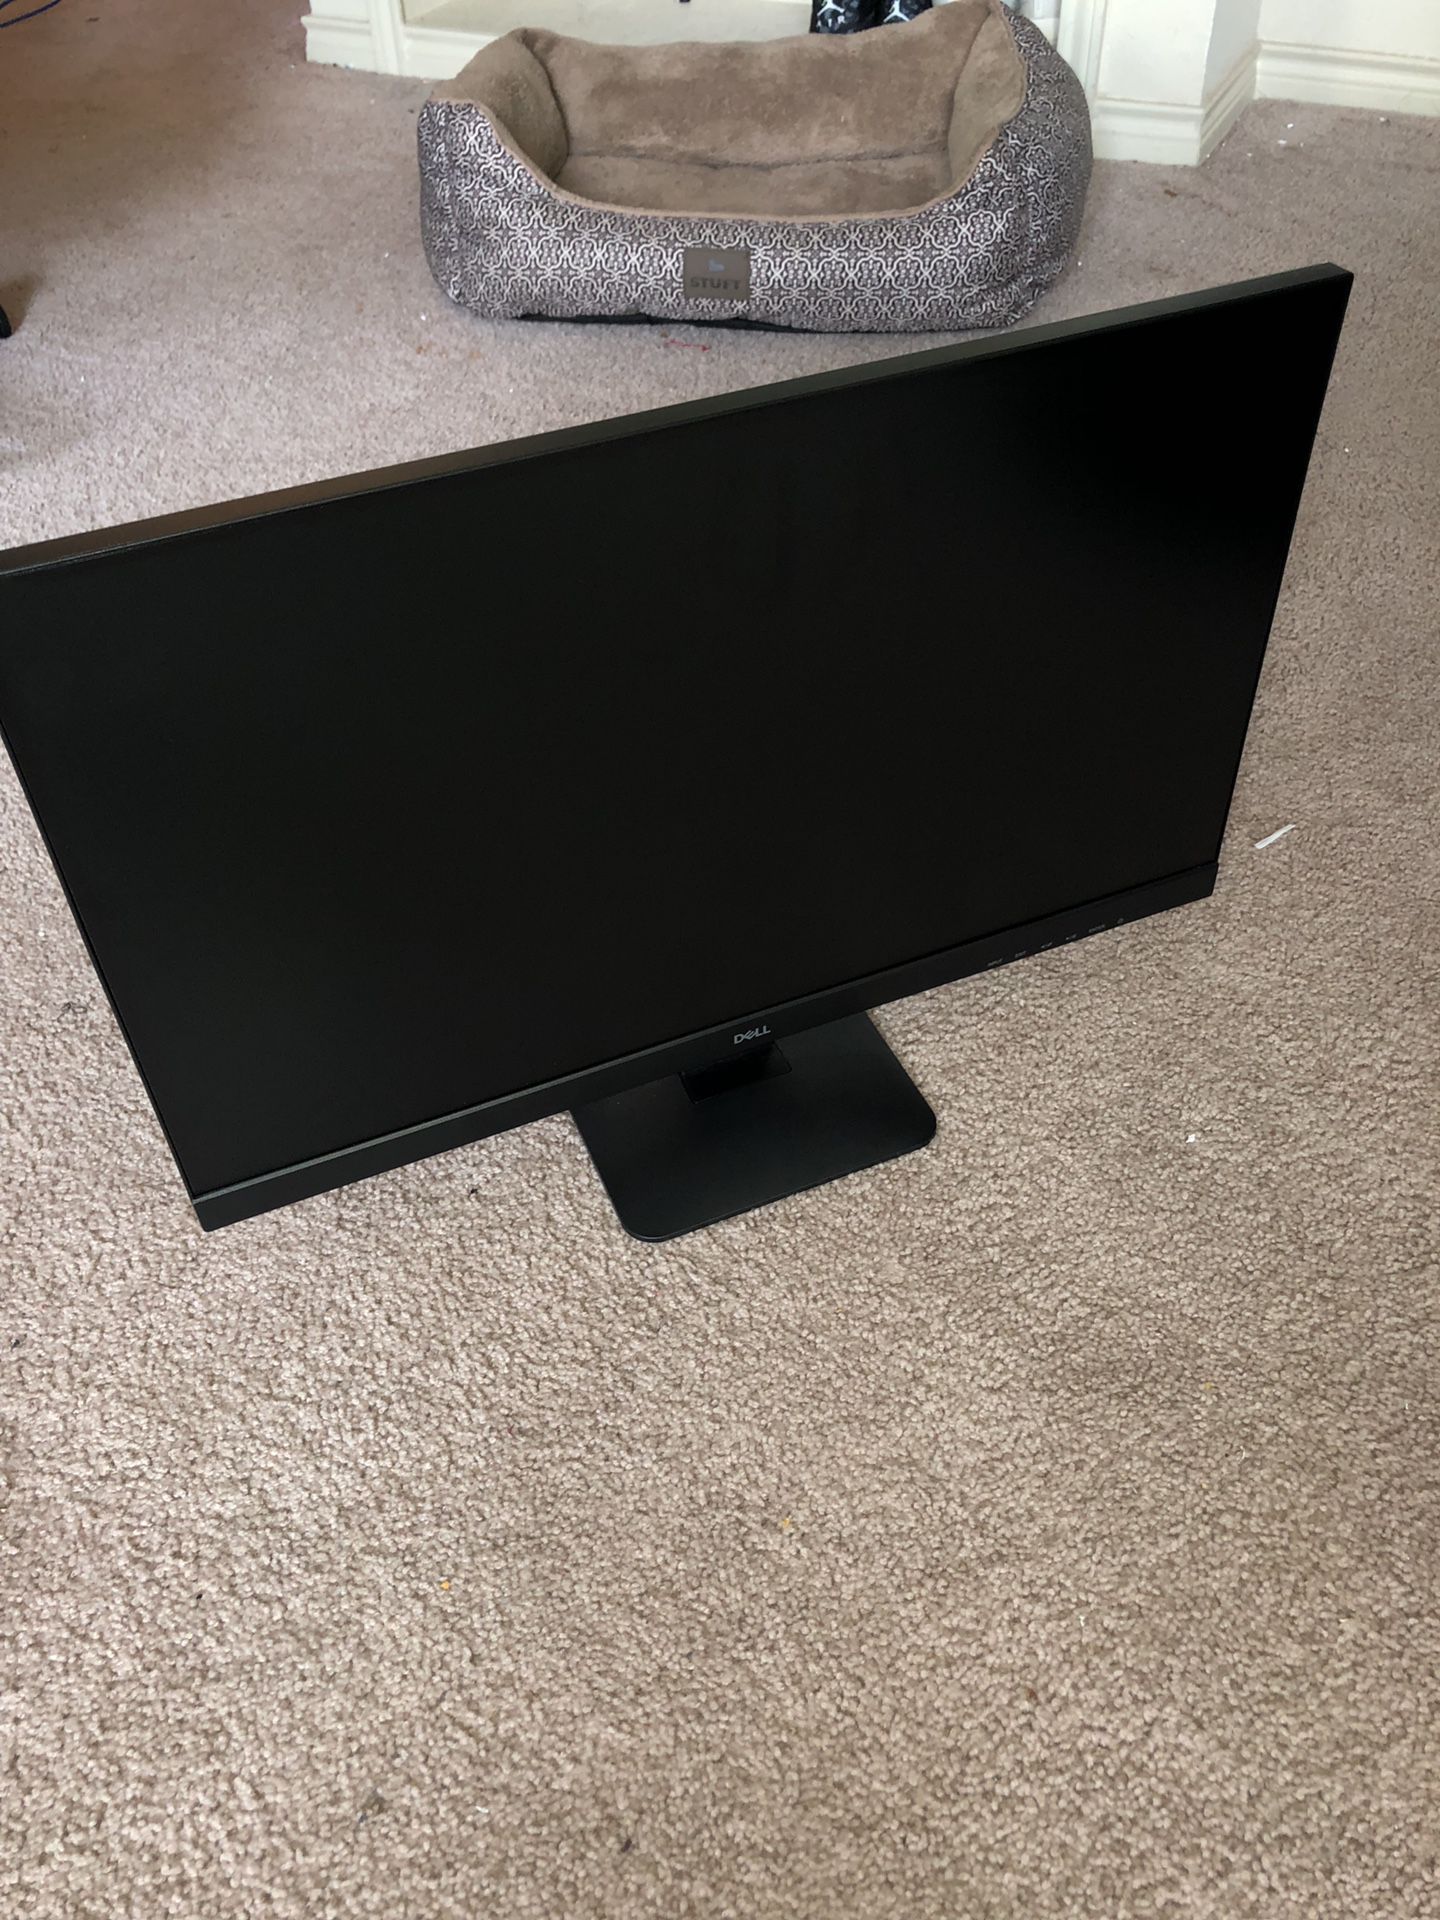 Dell 27 inch 144hz gaming monitor